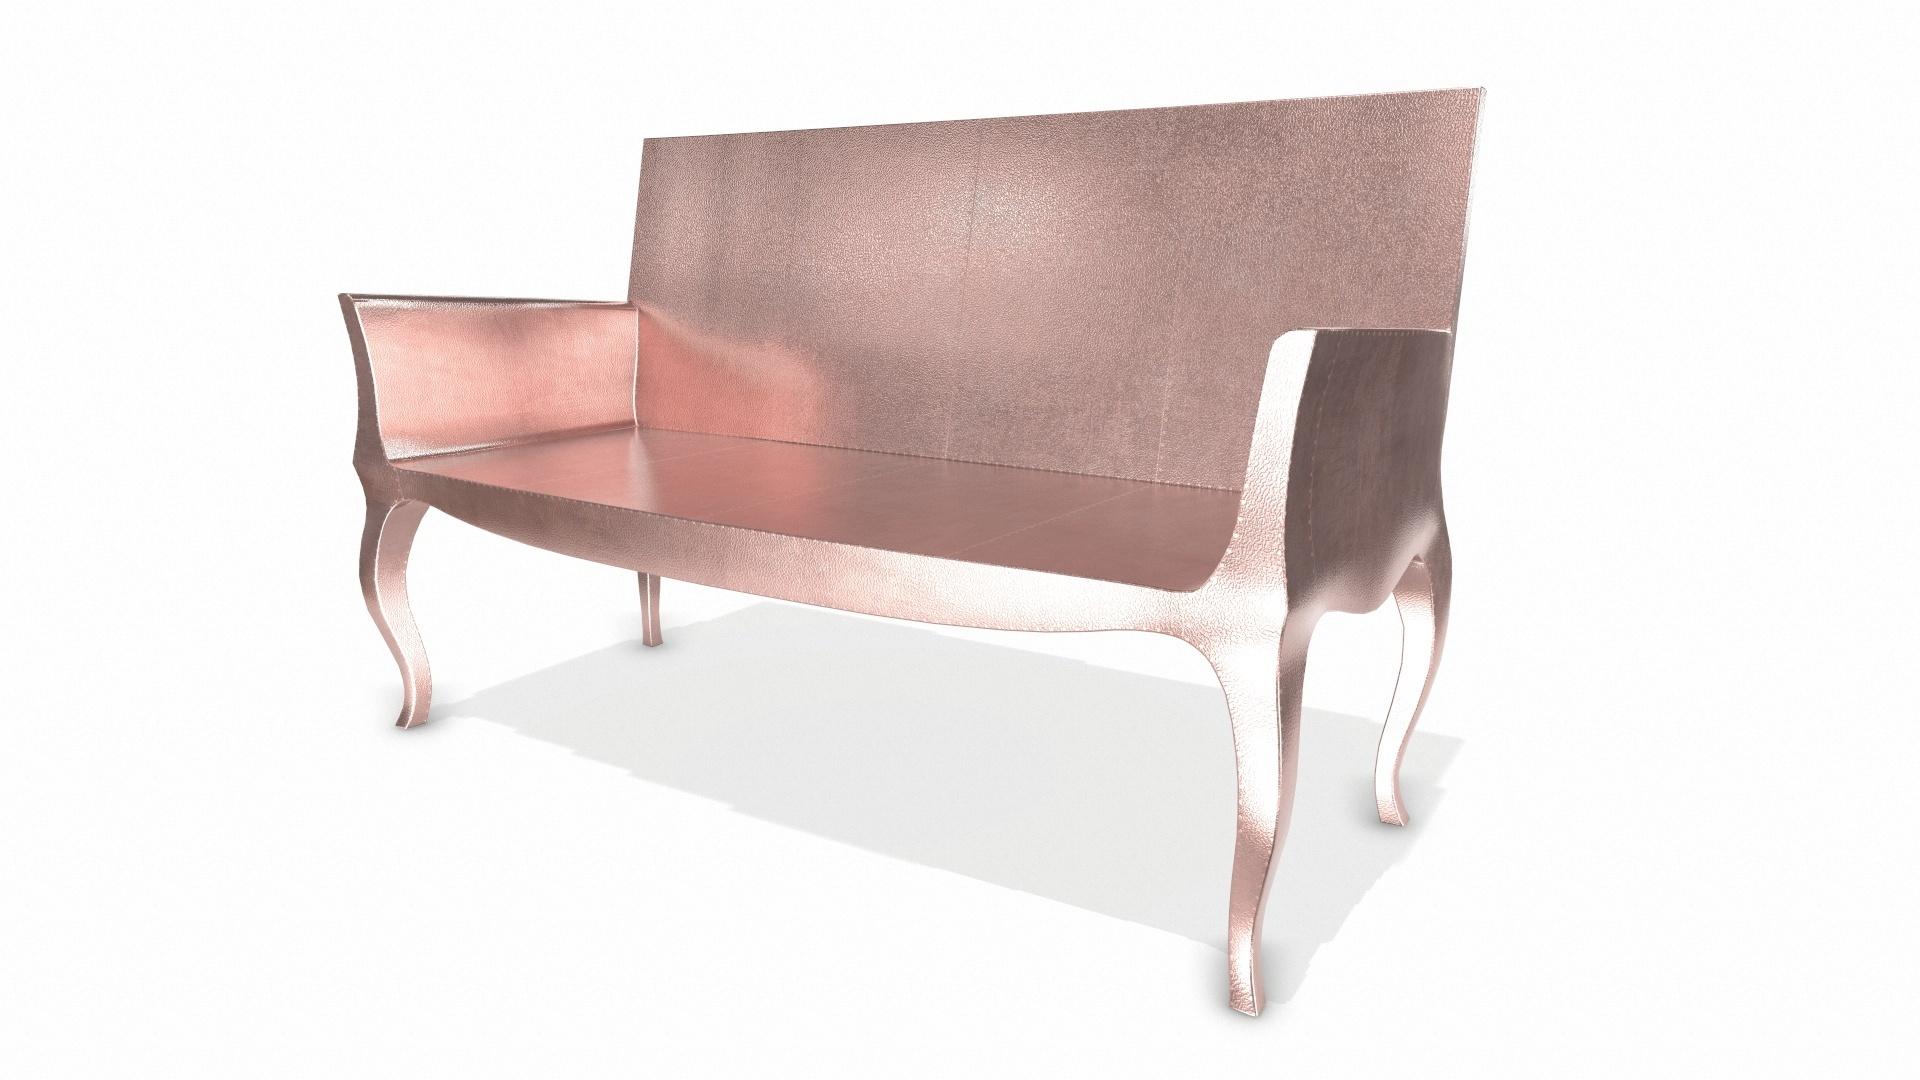 American Louise Settee Art Deco Settees in Fine Hammered Copper by Paul Mathieu For Sale